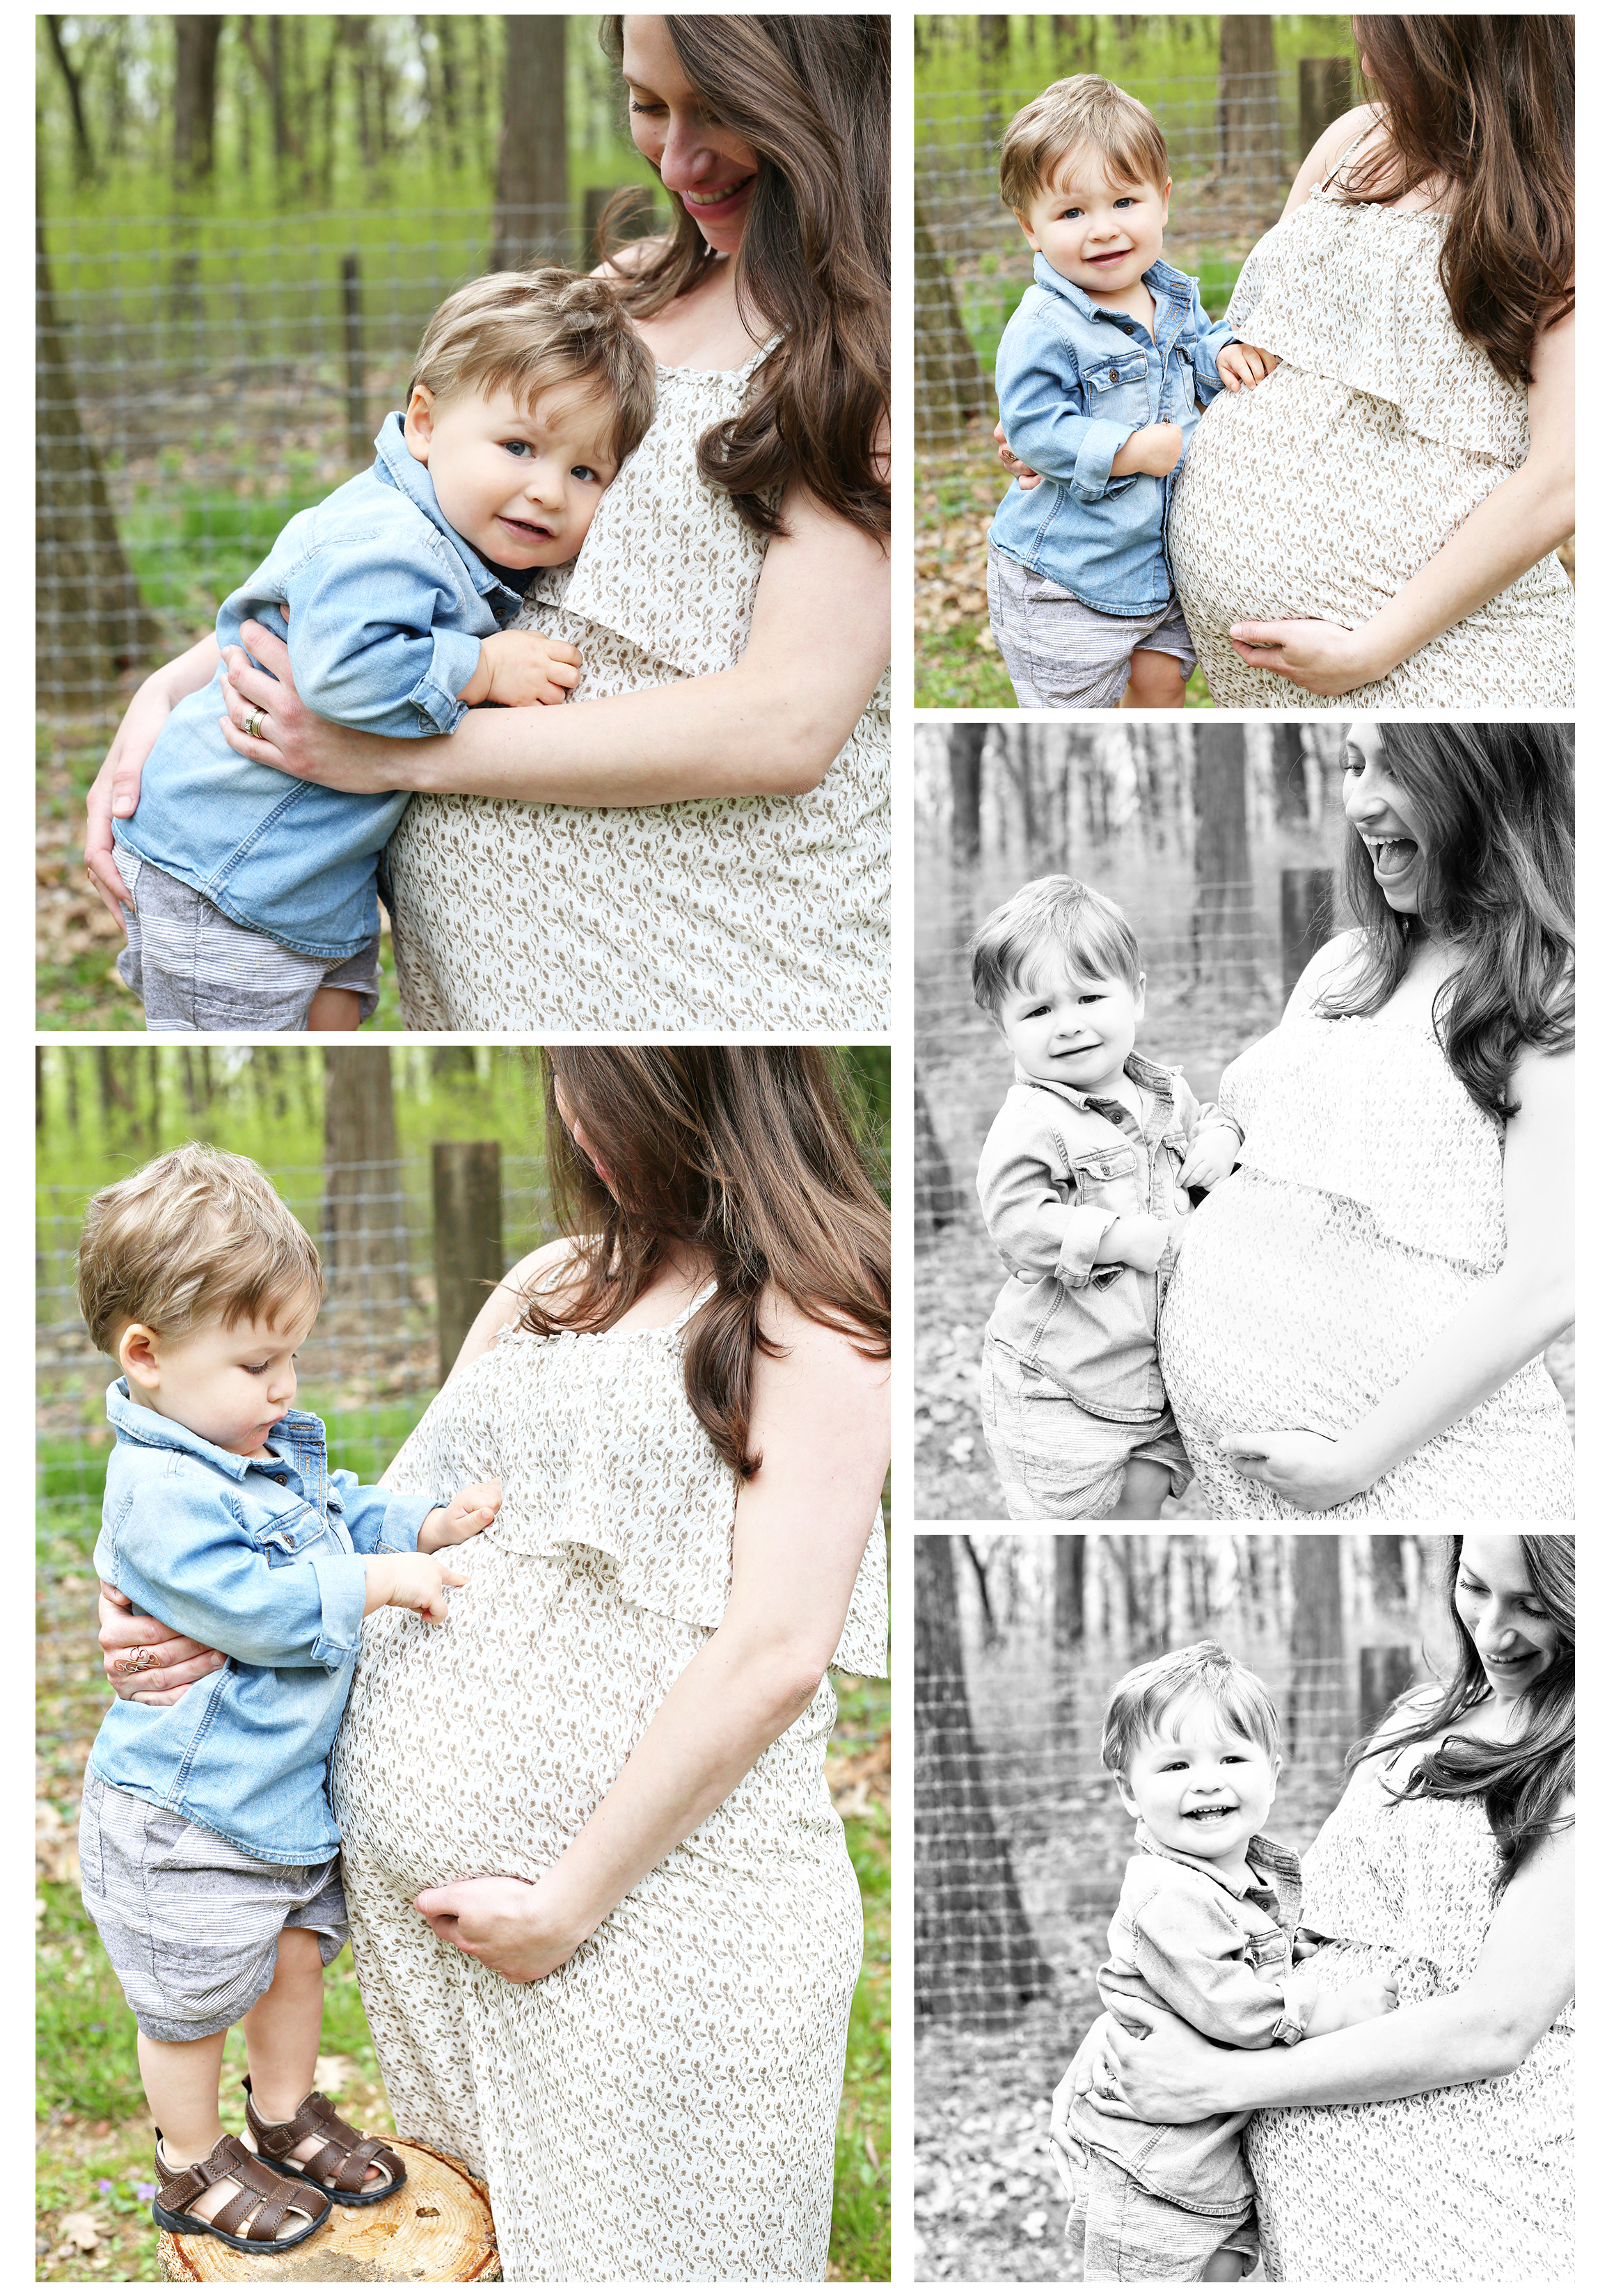 7 Maternity Picture Ideas With Toddler | Click Love Grow